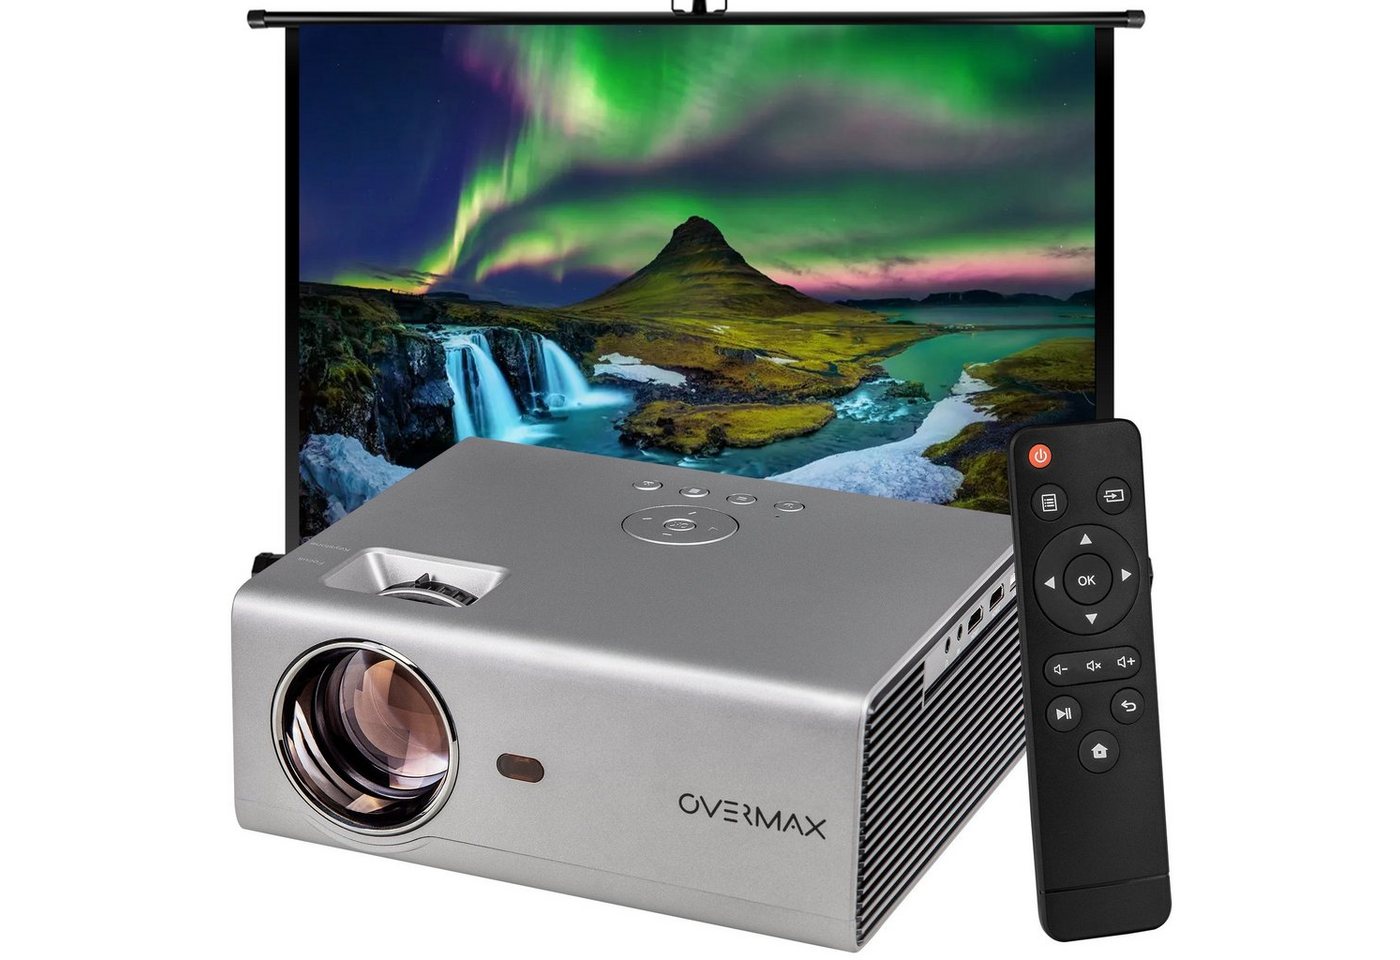 Overmax MULTIPIC 3.5 Beamer (2200 lm, 1500:1, 1080p px, 1080p WI-FI YouTube 2x HDMI, USB, D-sub 50 000h) von Overmax